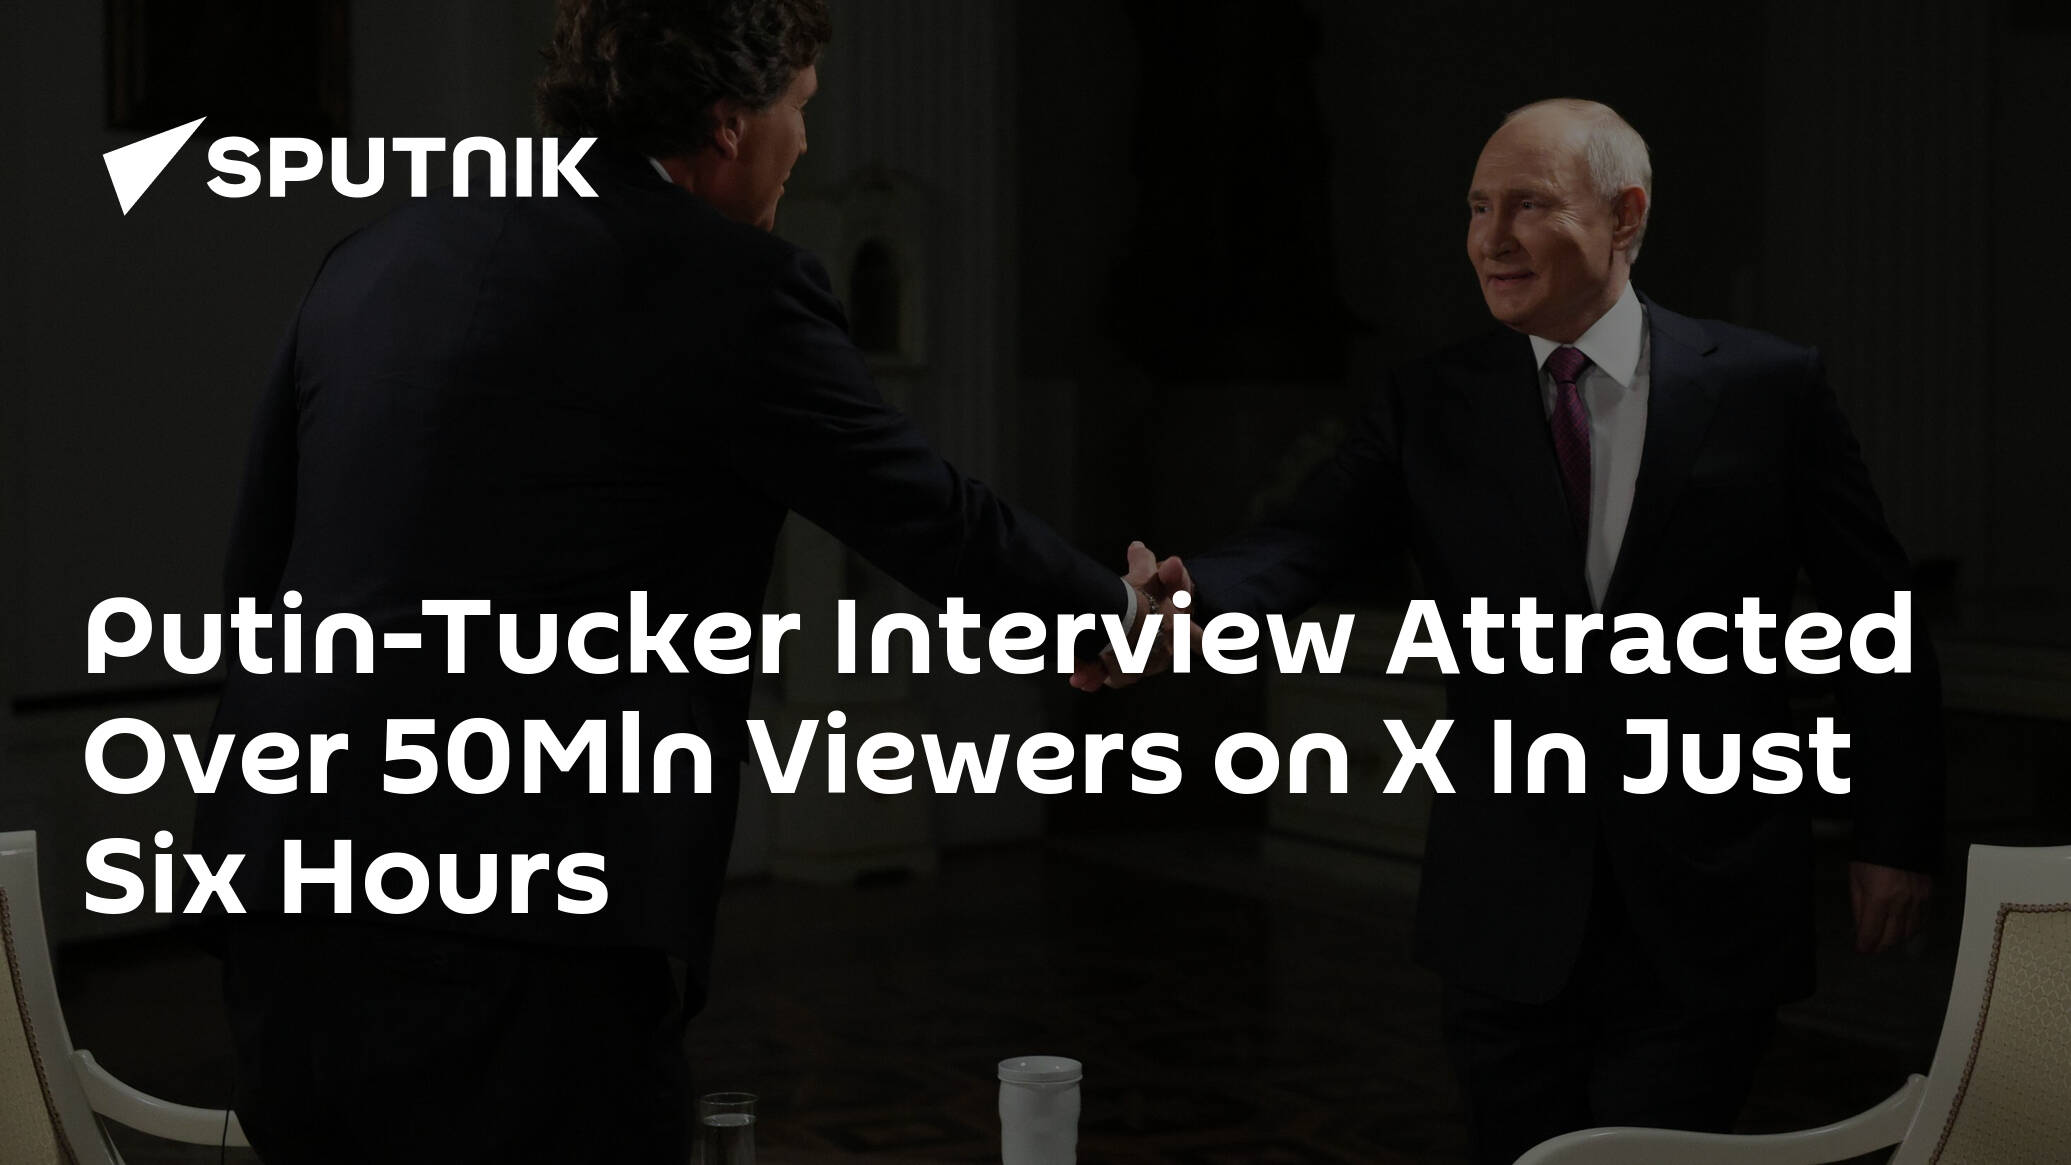 Putin-Tucker Interview Attracted Over 50Mln Viewers on X In Just Six Hours